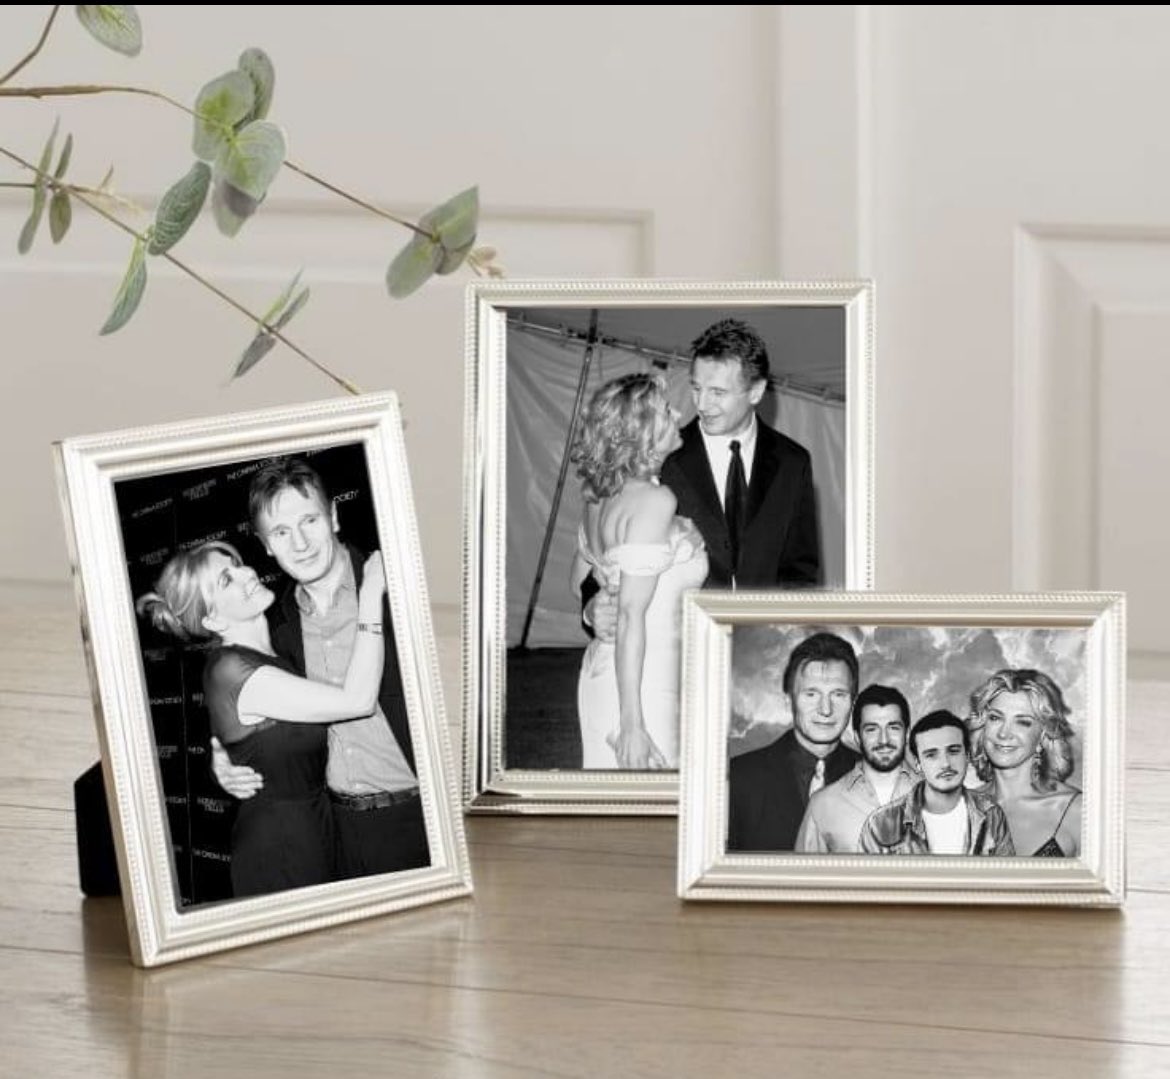 The Neeson Family ❤ #LiamNeeson #natasharichardson #michealrichardson #DanielNeeson 🥺 They would have been a beautiful family, in fact... They are.🥰